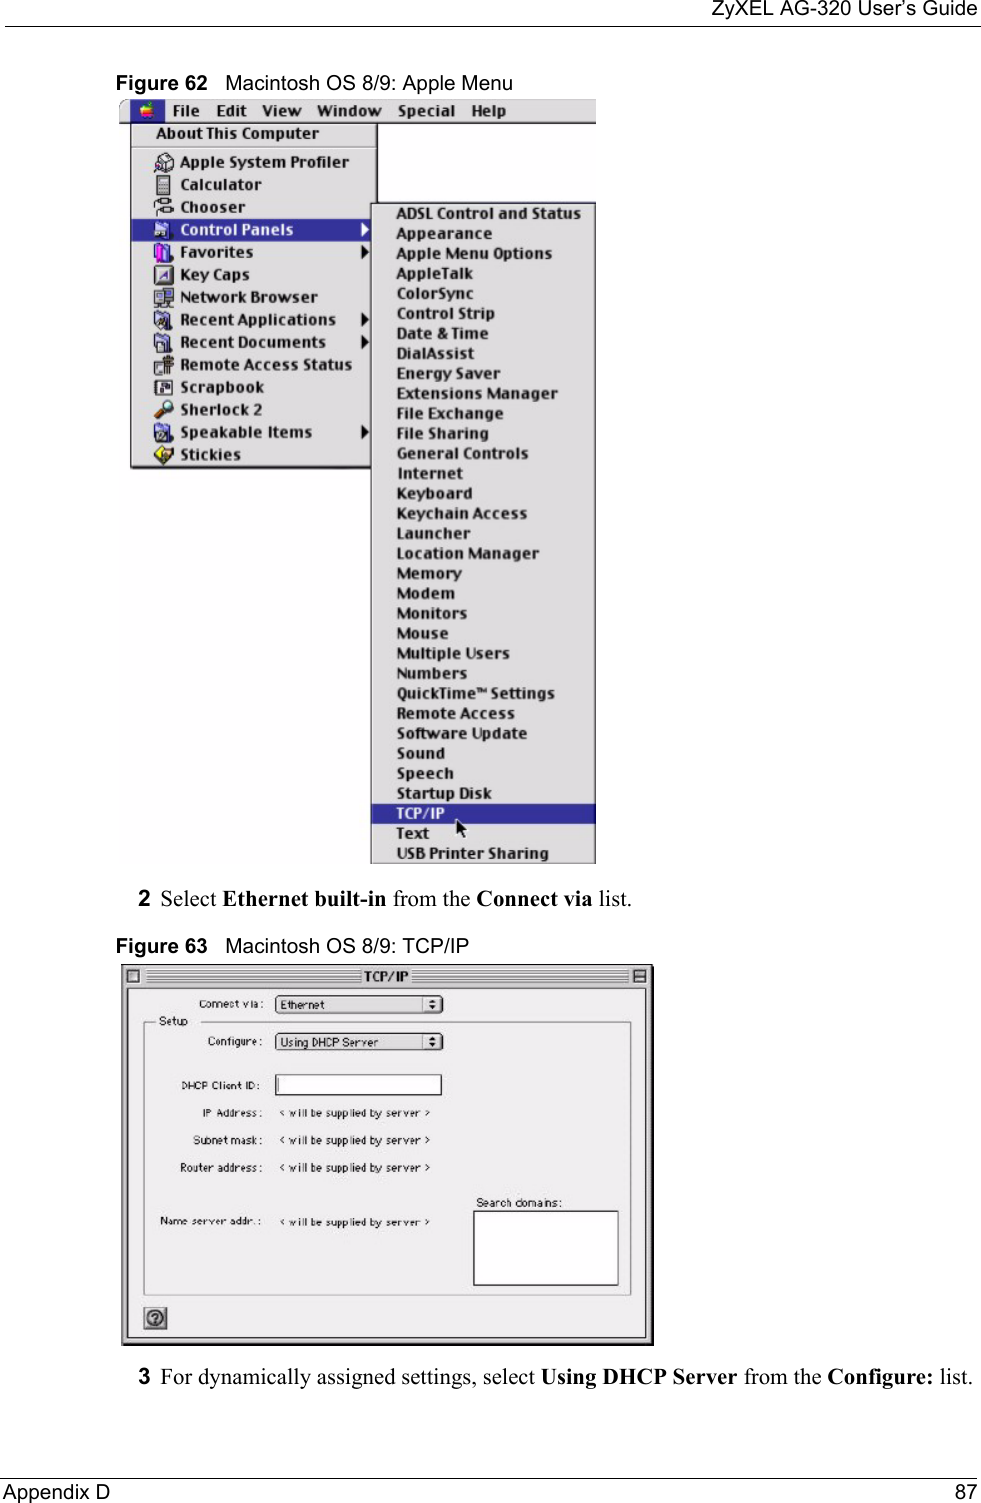 ZyXEL AG-320 User’s GuideAppendix D 87Figure 62   Macintosh OS 8/9: Apple Menu2Select Ethernet built-in from the Connect via list.Figure 63   Macintosh OS 8/9: TCP/IP3For dynamically assigned settings, select Using DHCP Server from the Configure: list.